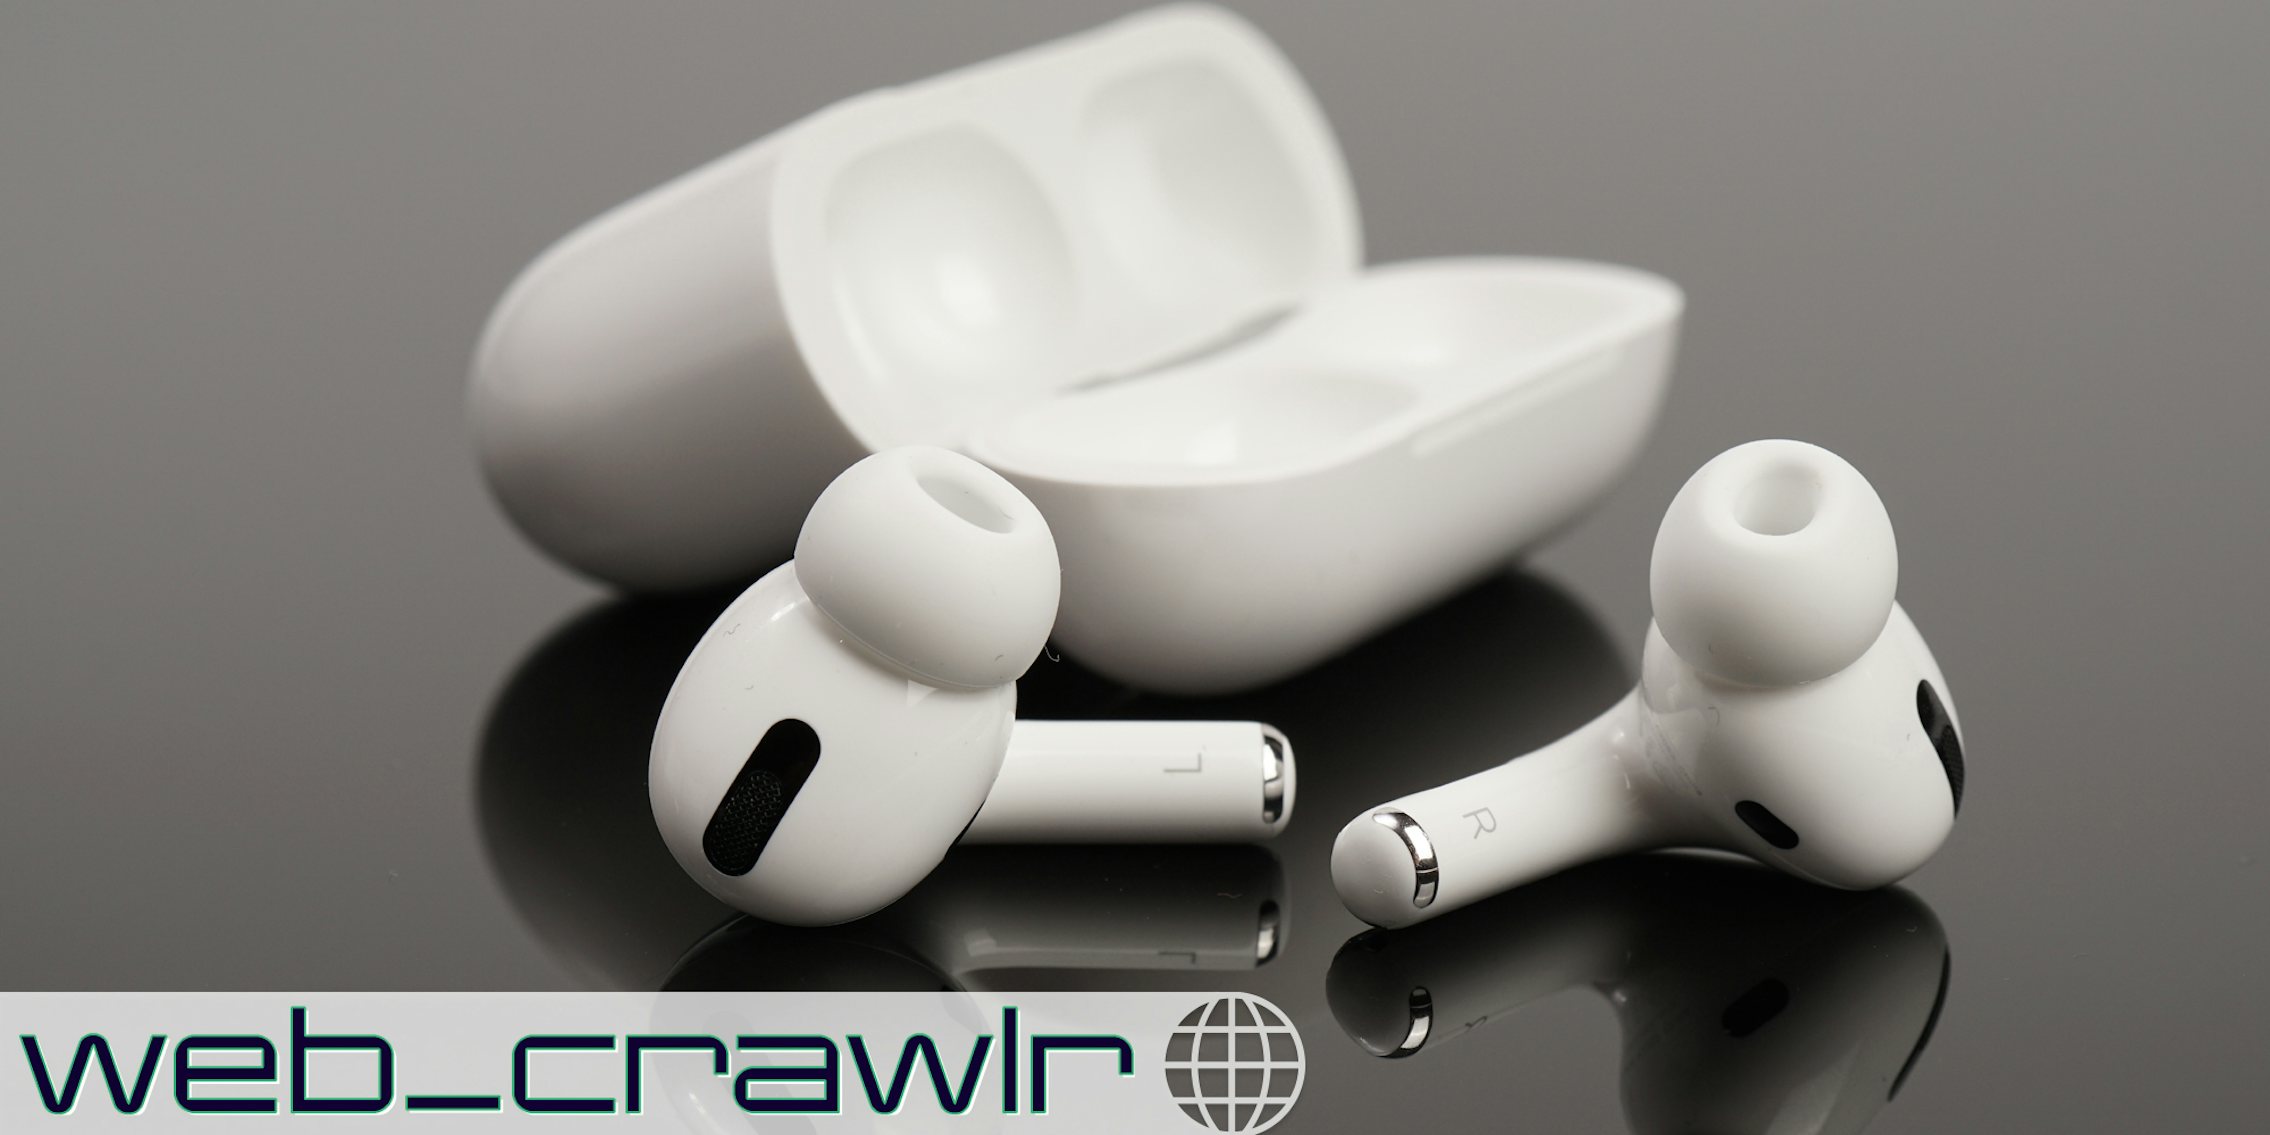 AirPods on a table. The Daily Dot newsletter web_crawlr logo is in the bottom right corner.